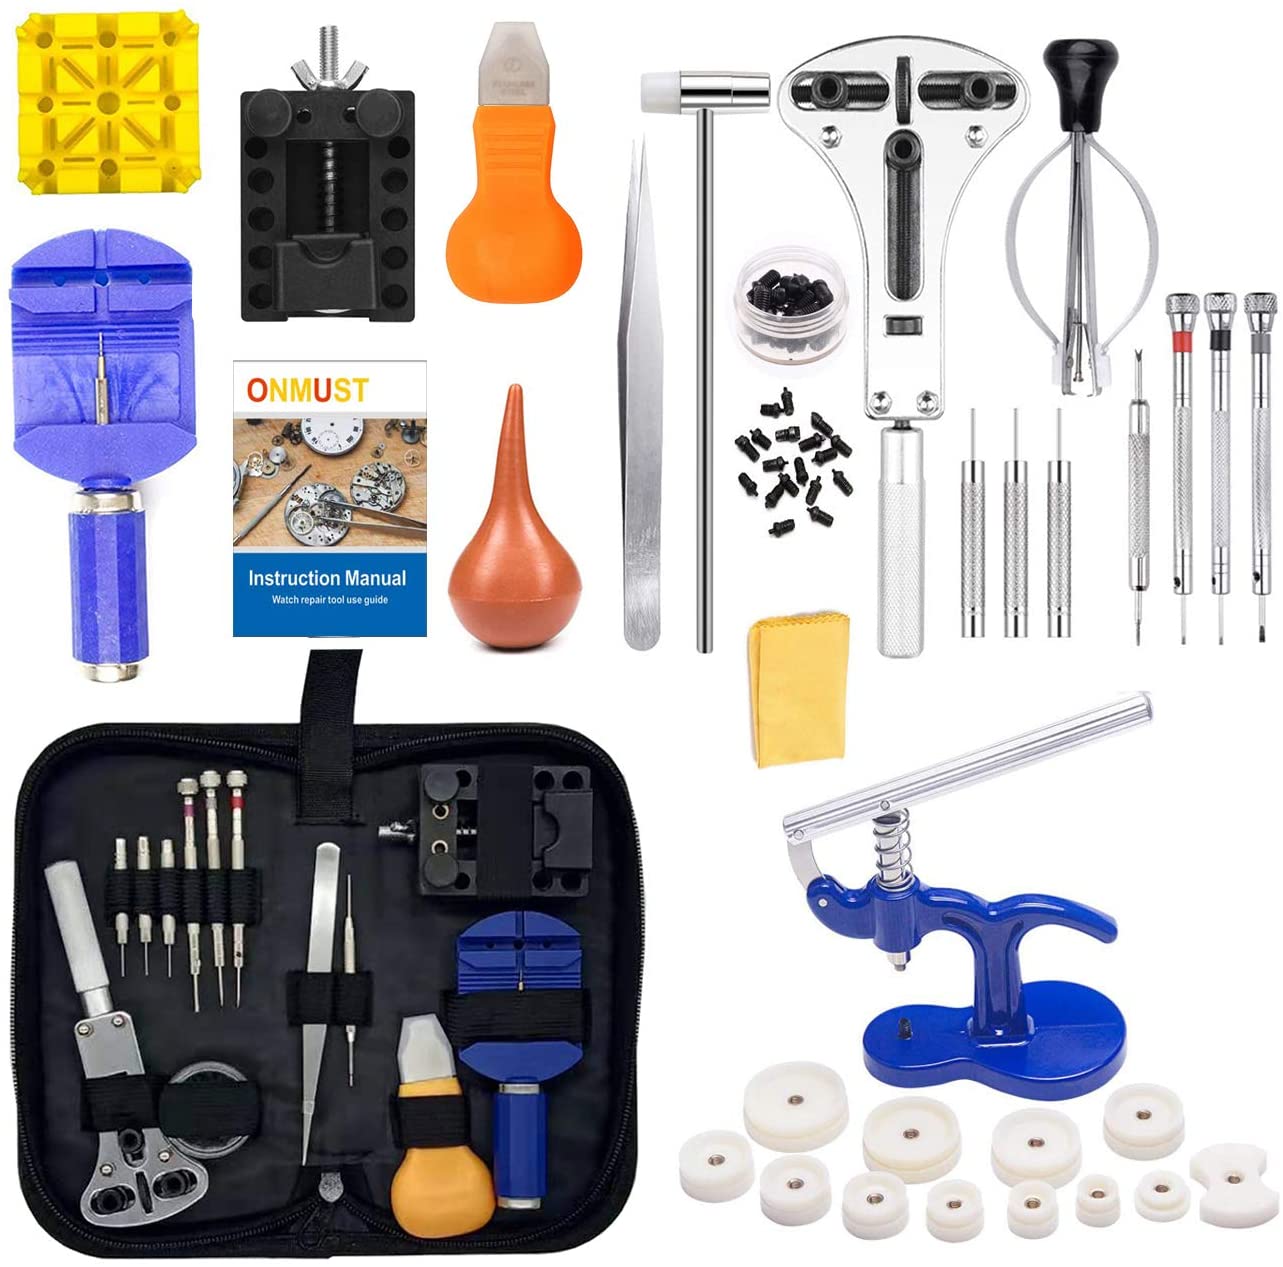 Tools You Should Have for Your Watch Repair Kit | WatchShopping.com